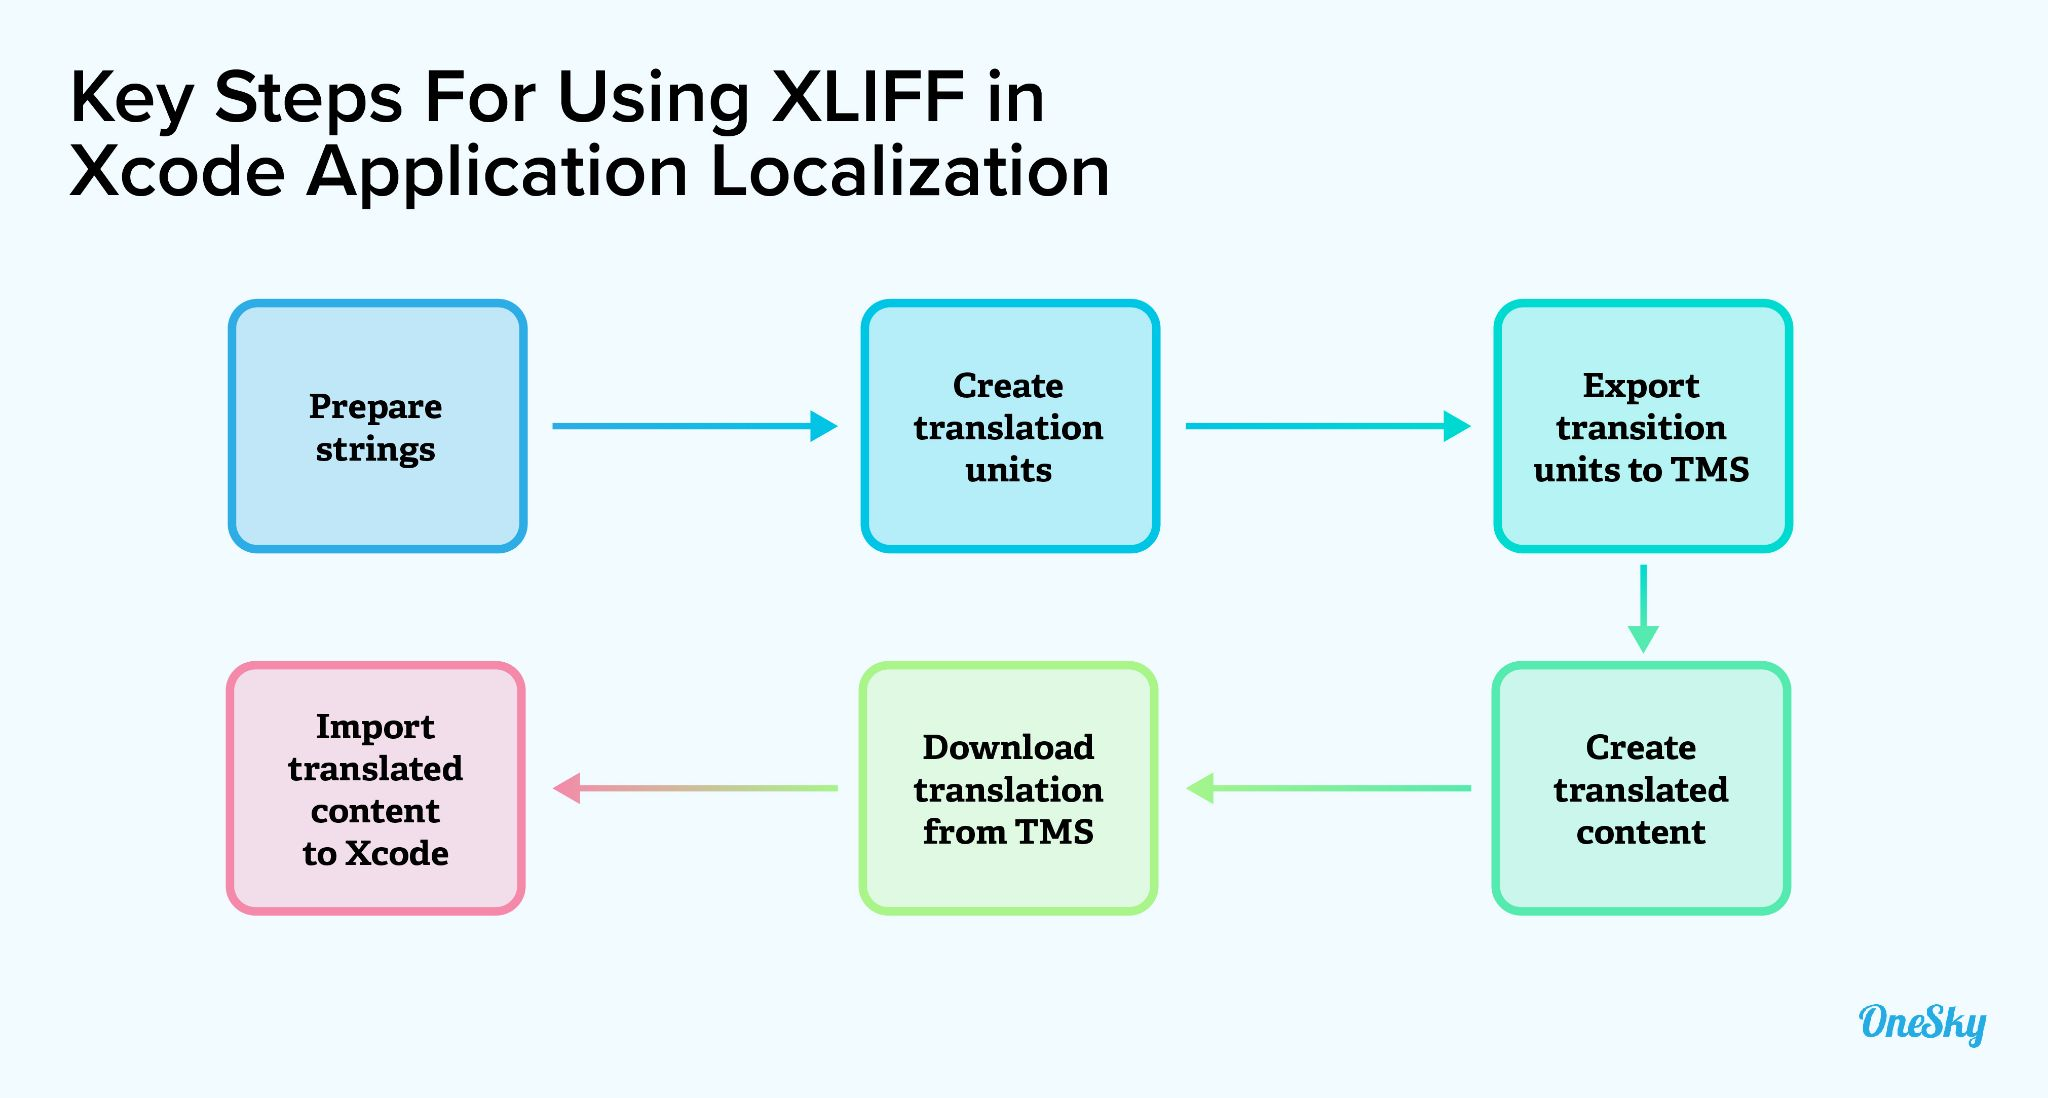 How To Use XLIFF To Translate Xcode Applications